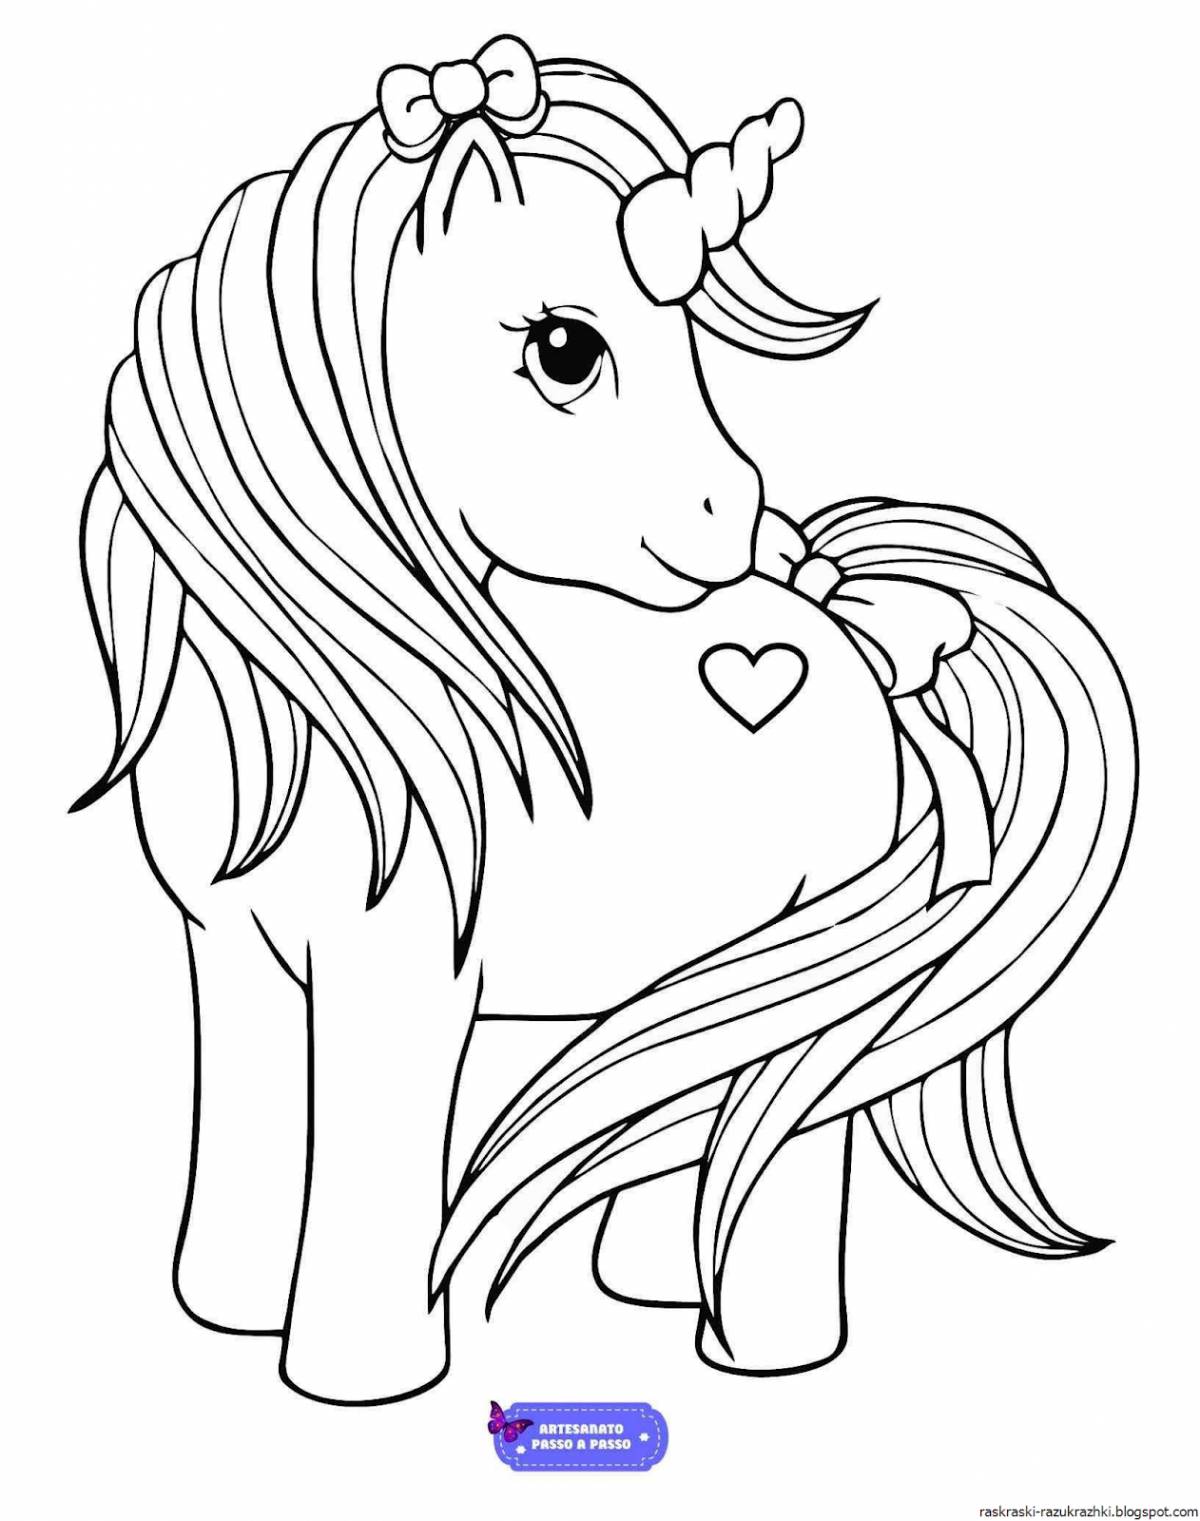 Playful unicorn coloring book for 4-5 year olds